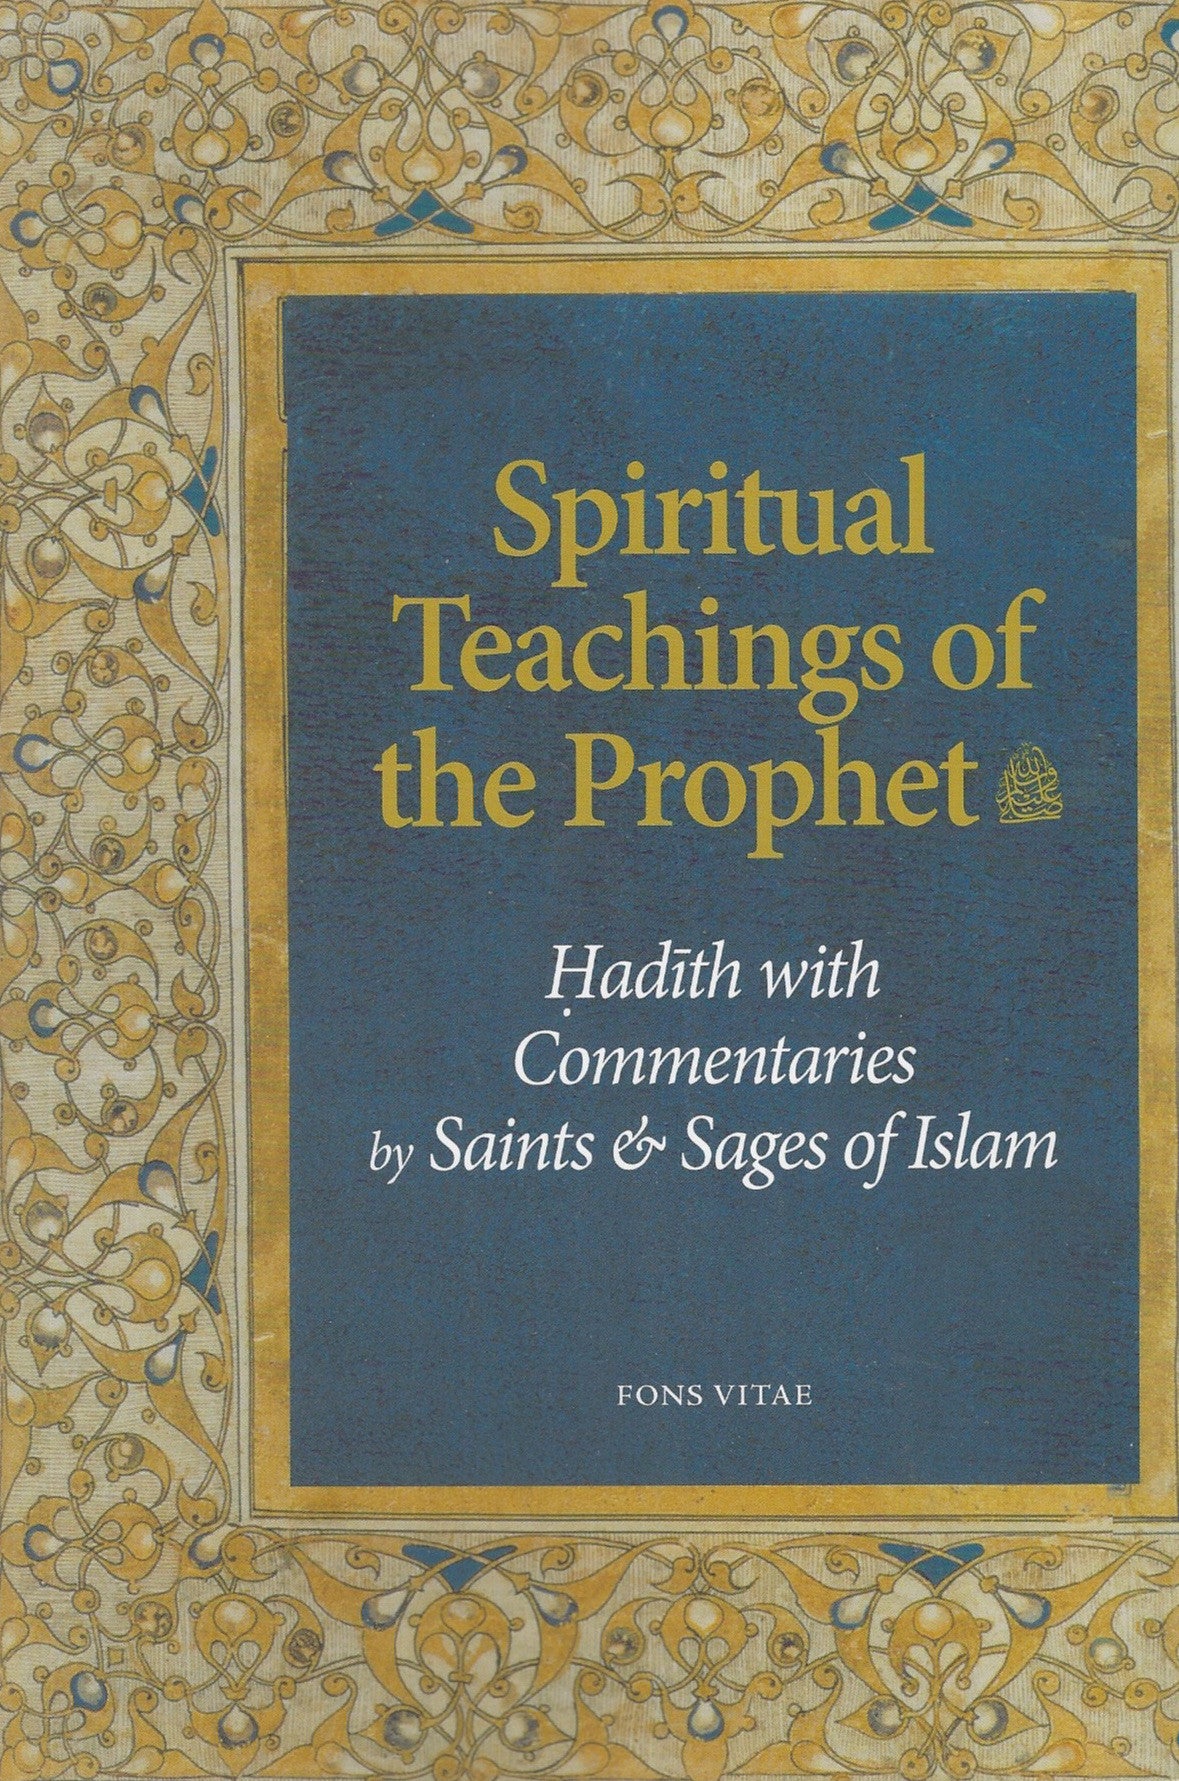 Spiritual Teachings of the Prophet: Hadith with Commentaries by Saints & Sages of Islam , Book - Daybreak Press Global Bookshop, Daybreak Press Global Bookshop
